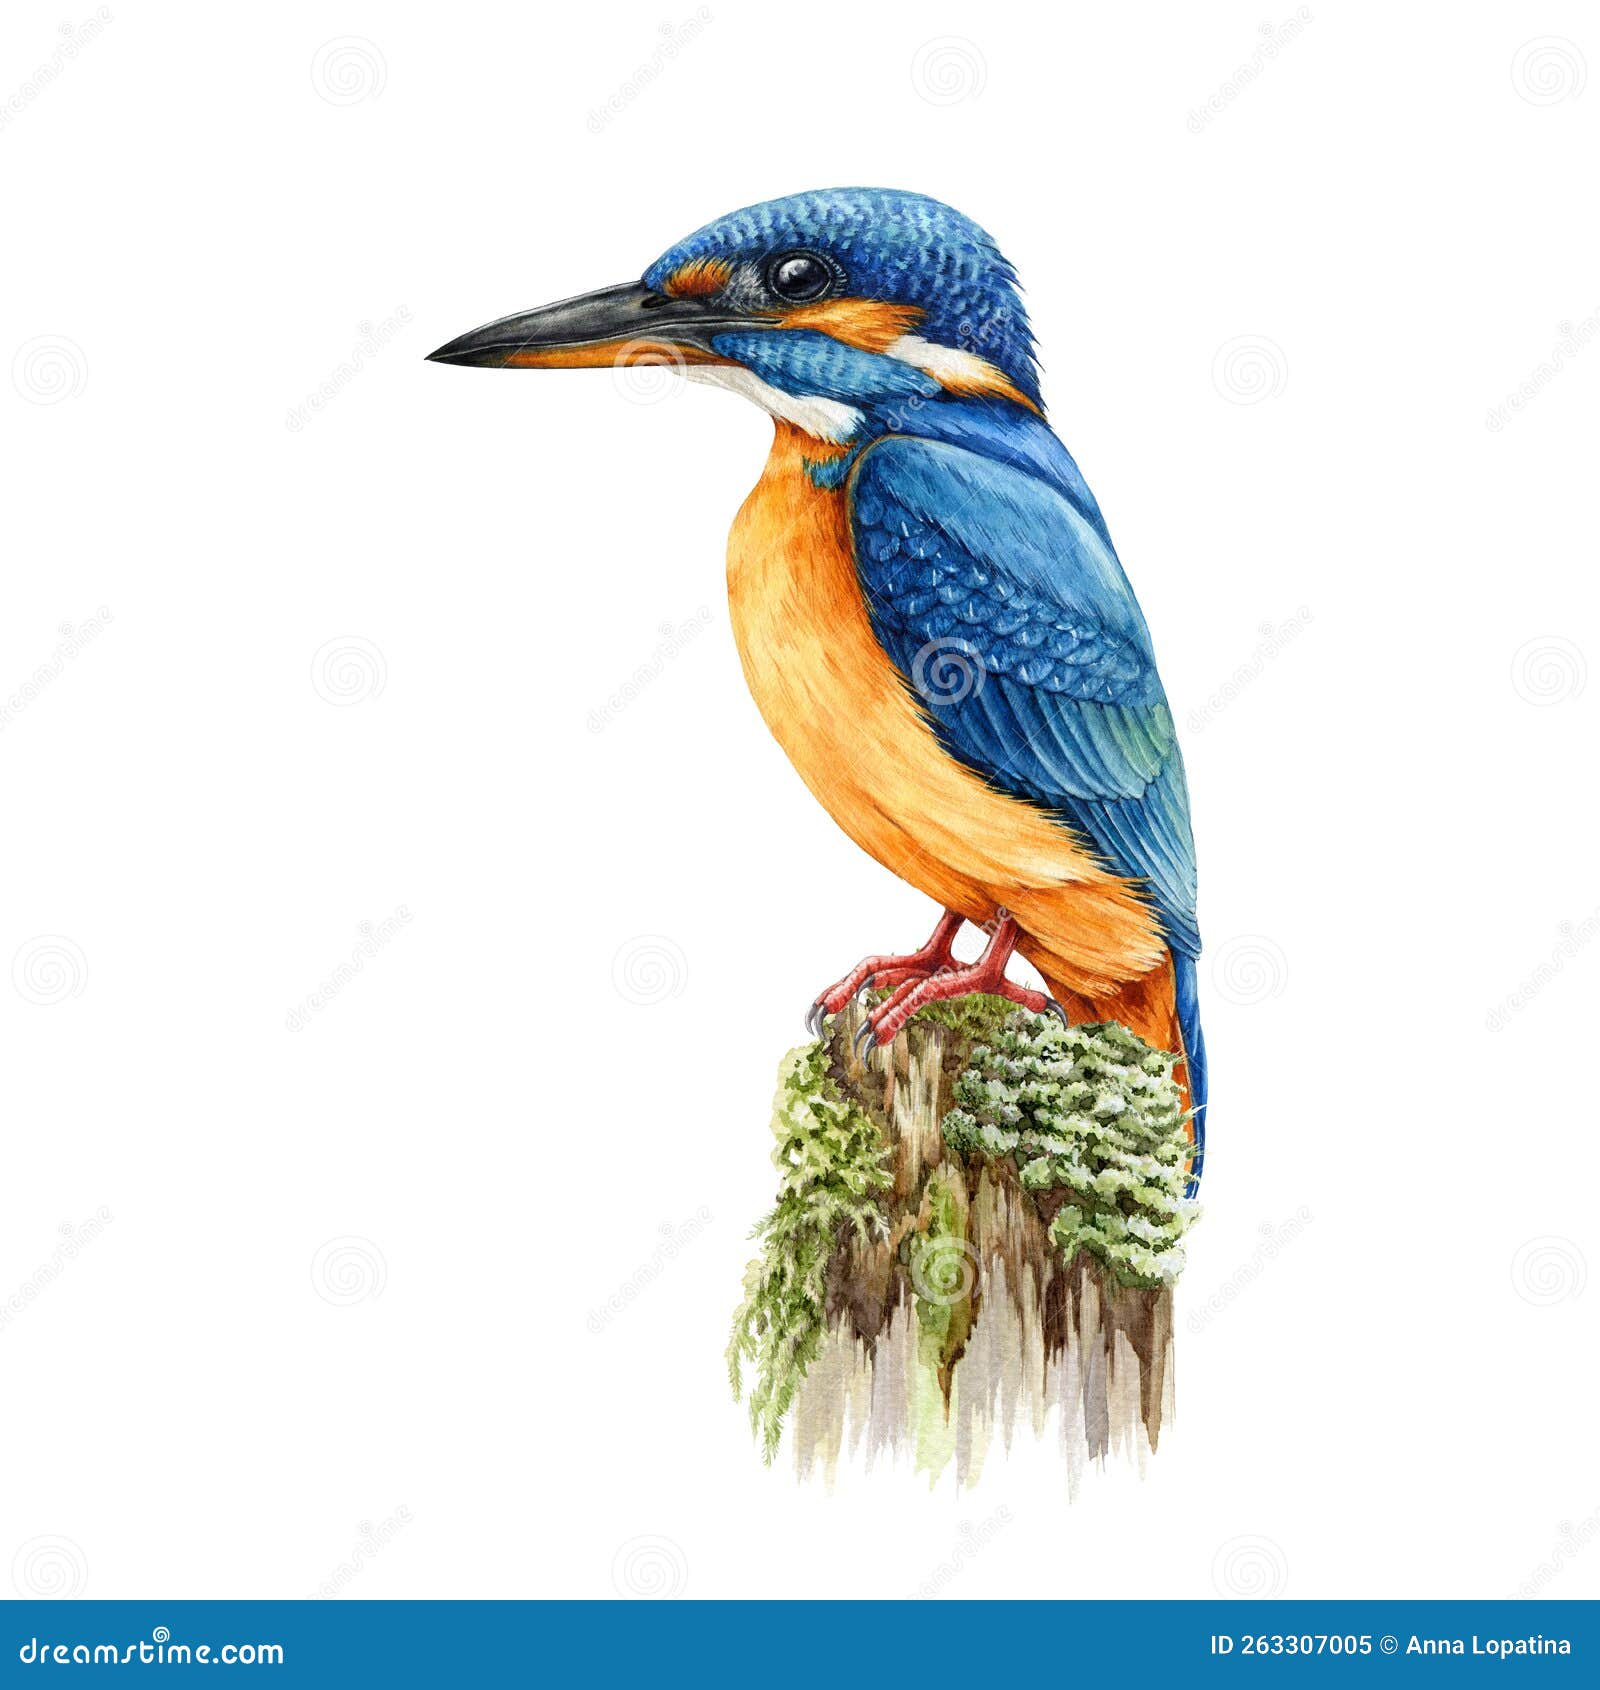 Kingfisher Drawing by Timothy Livingston - Pixels